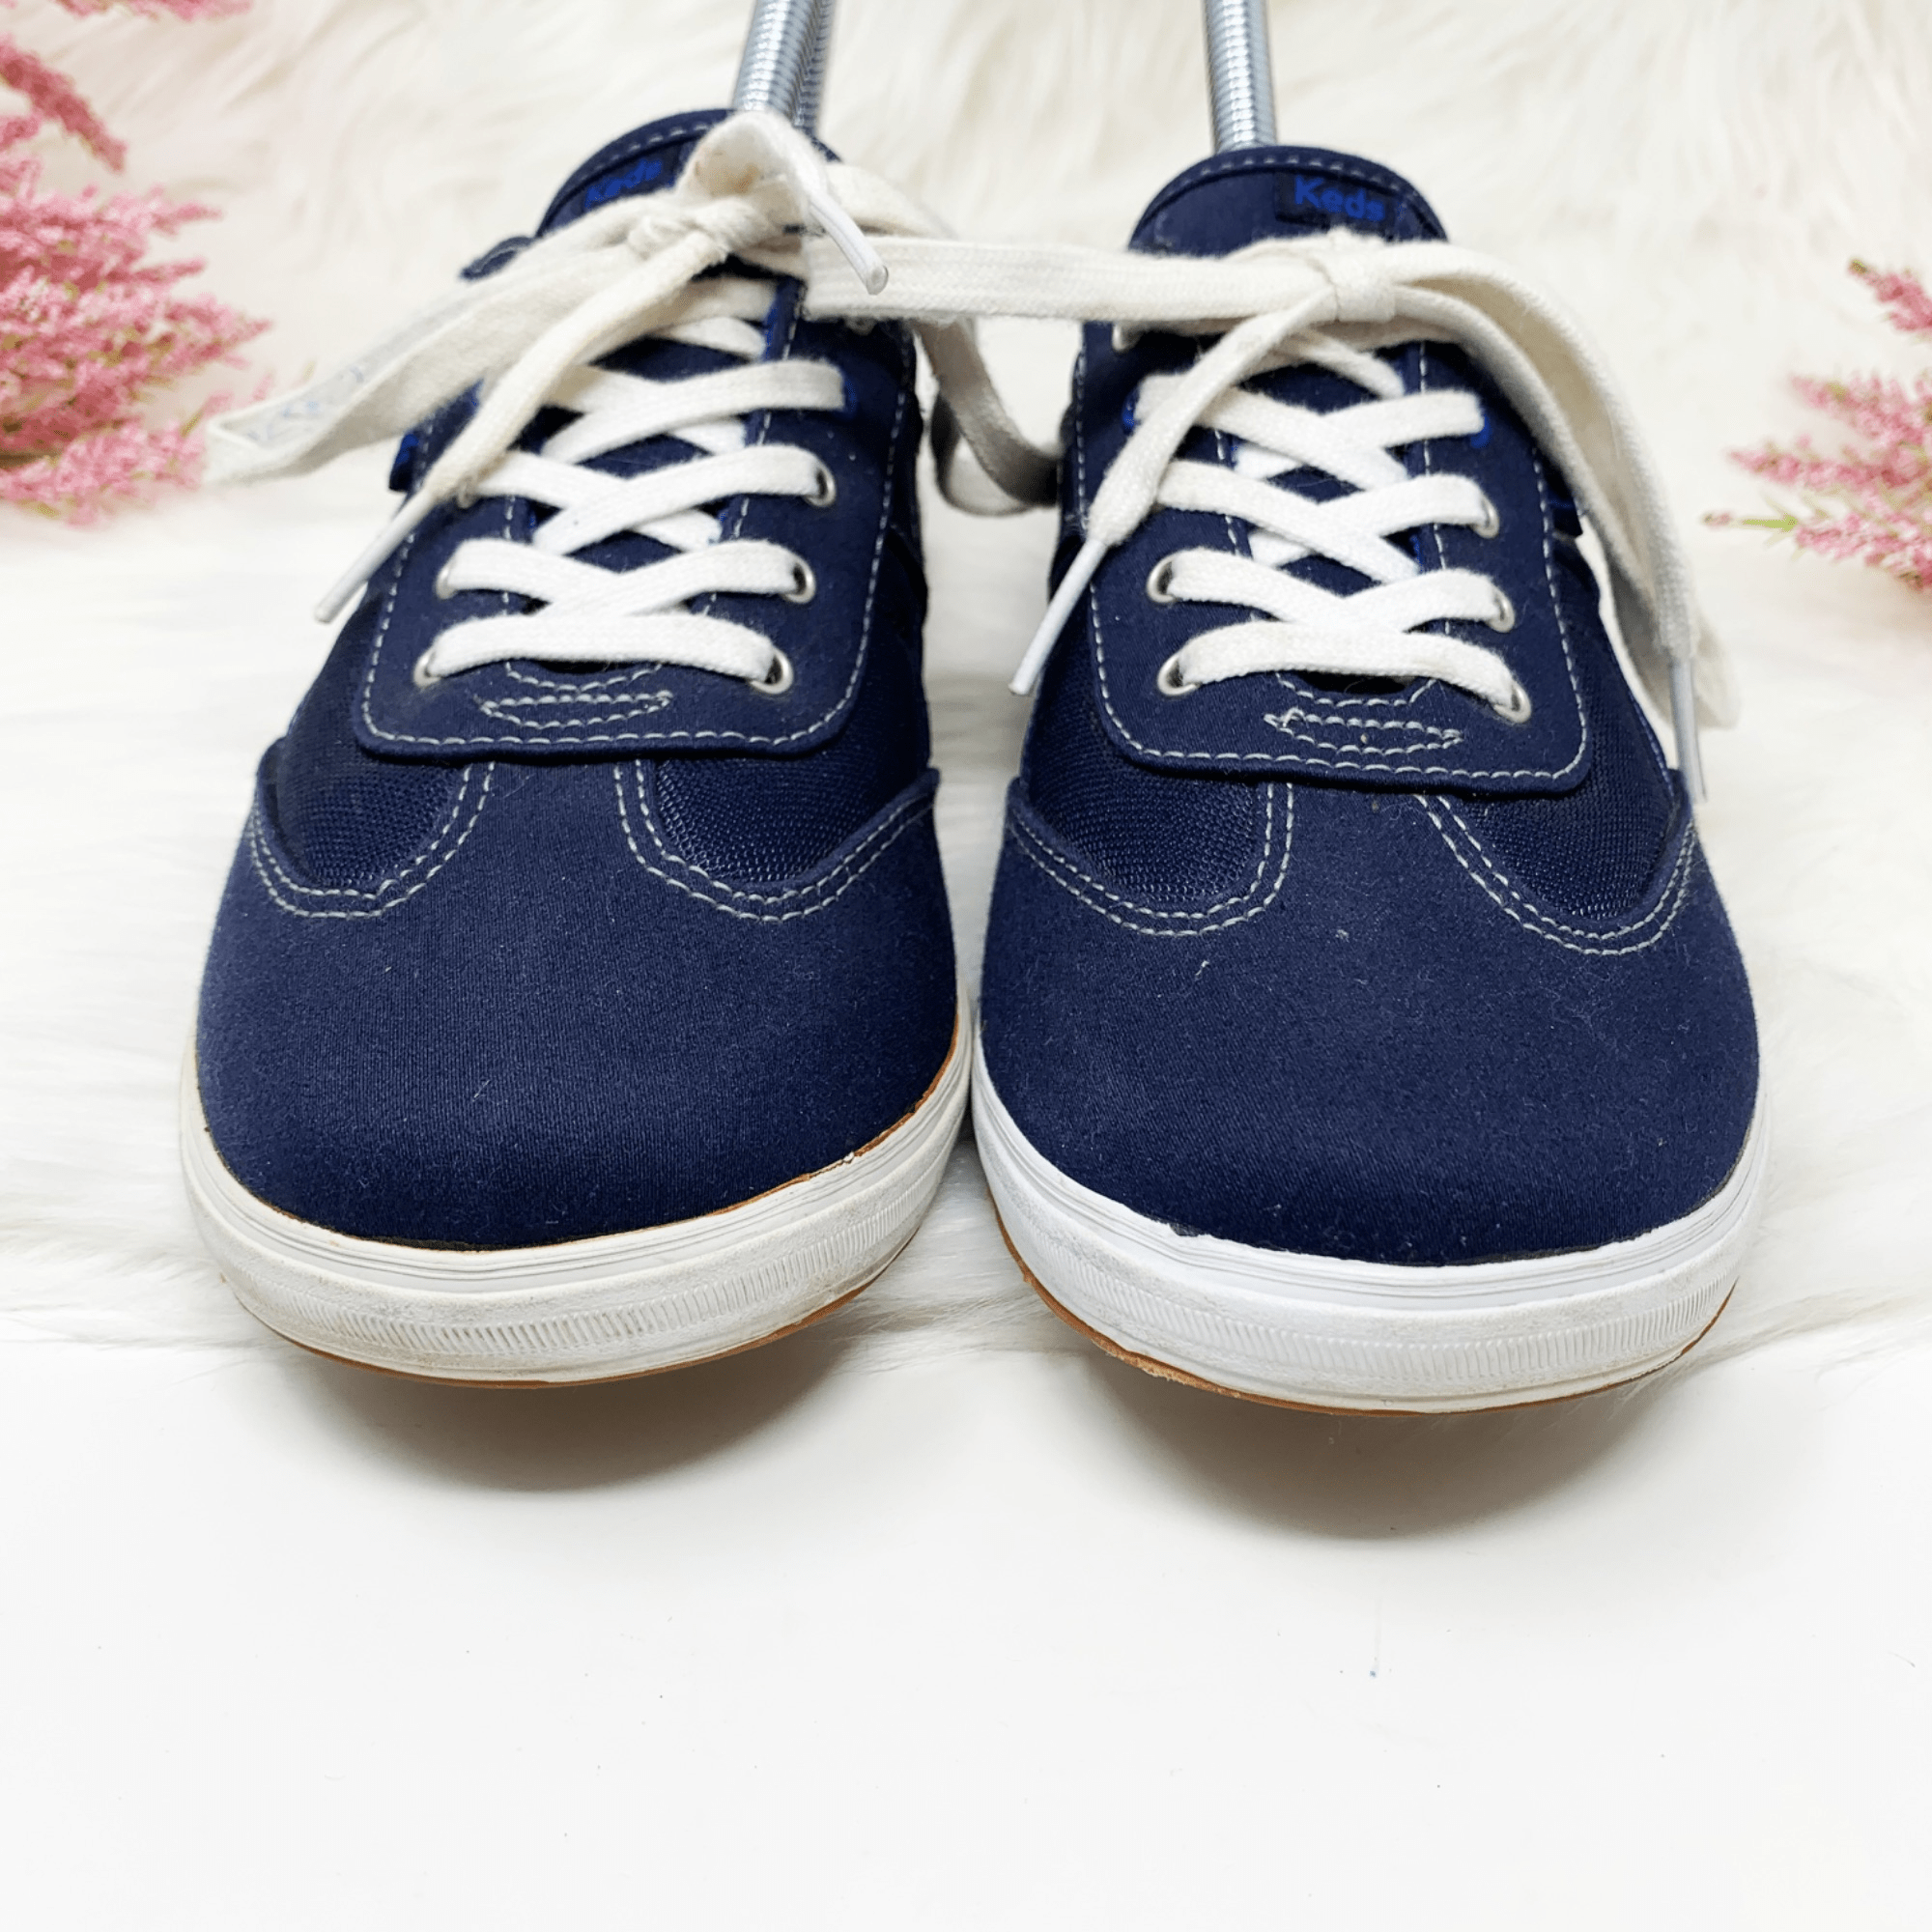 Keds Eco Blue Denim Canvas Lightweight Comfortable Trainers For Women - Blue - UK 3.5 - Sustainable Everyday Sneakers